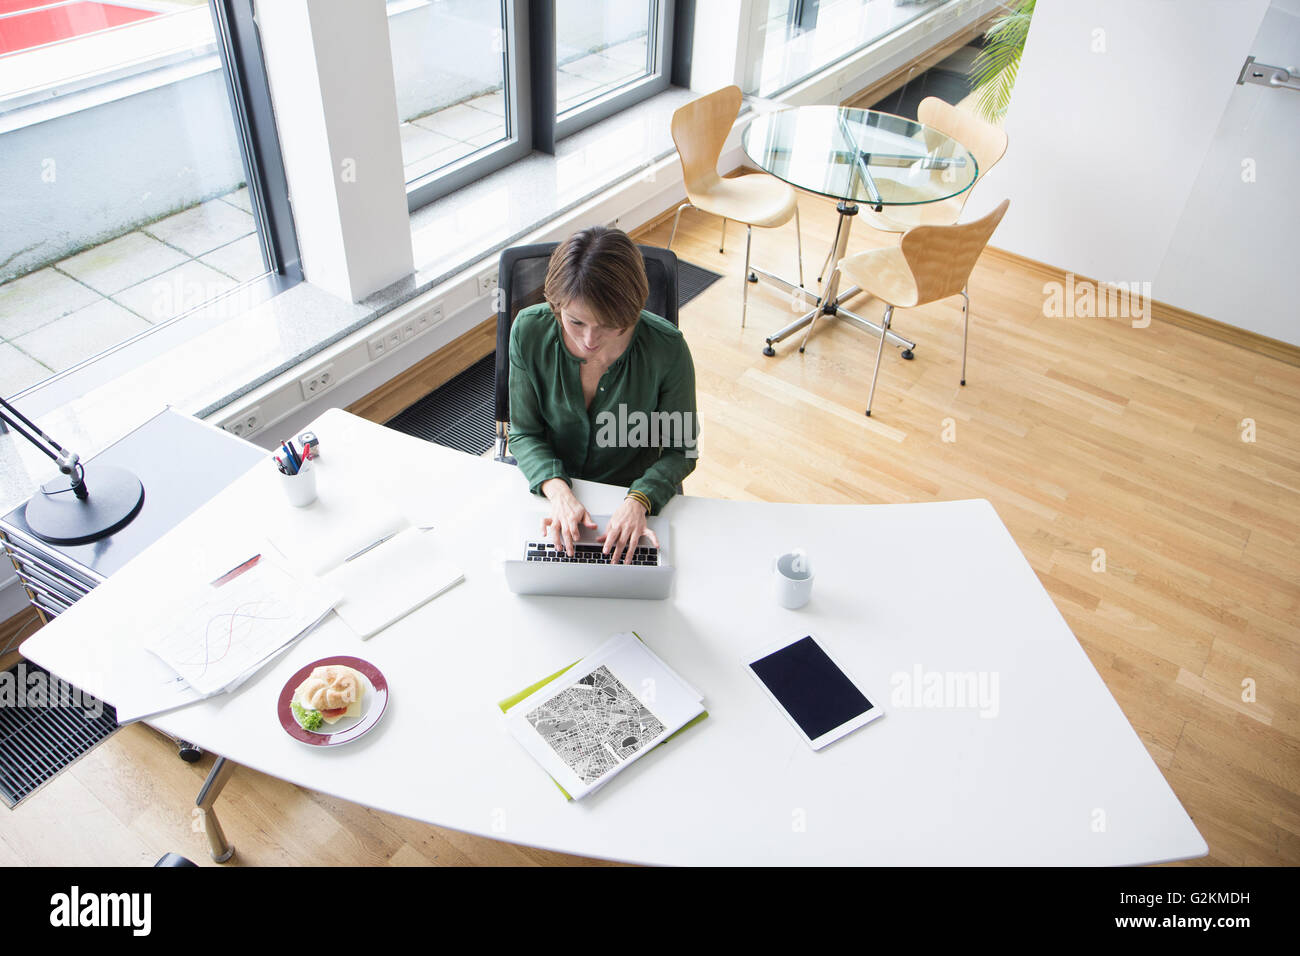 Businesswoman using laptop at office desk Stock Photo